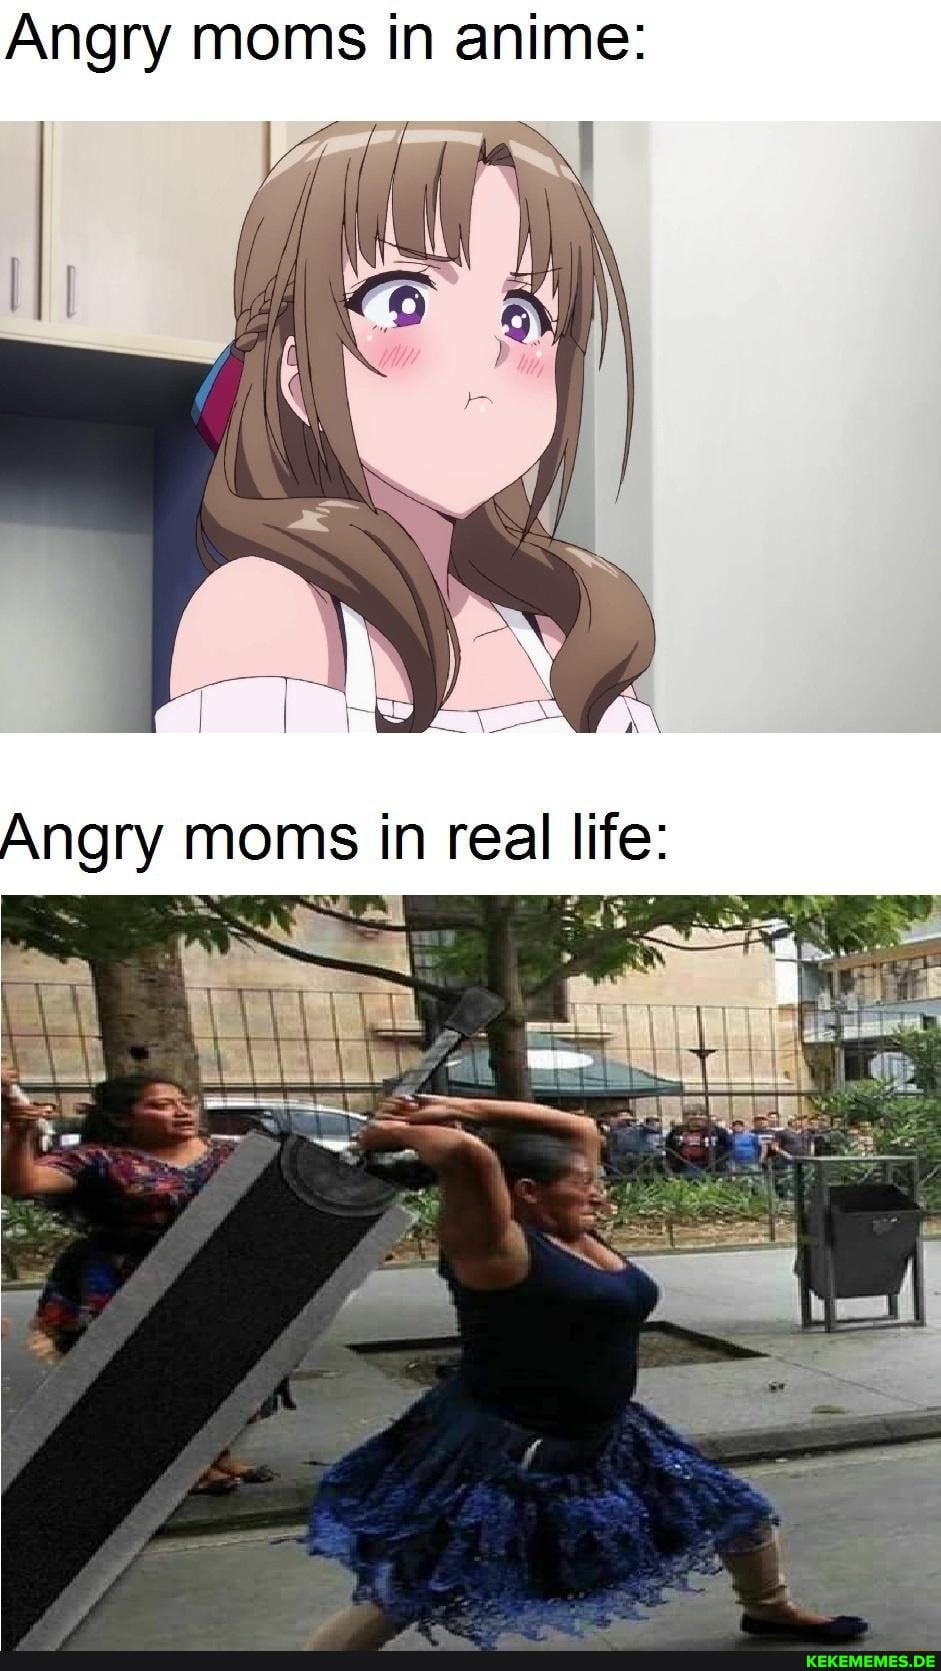 Angry moms in anime: Angry moms in real life: